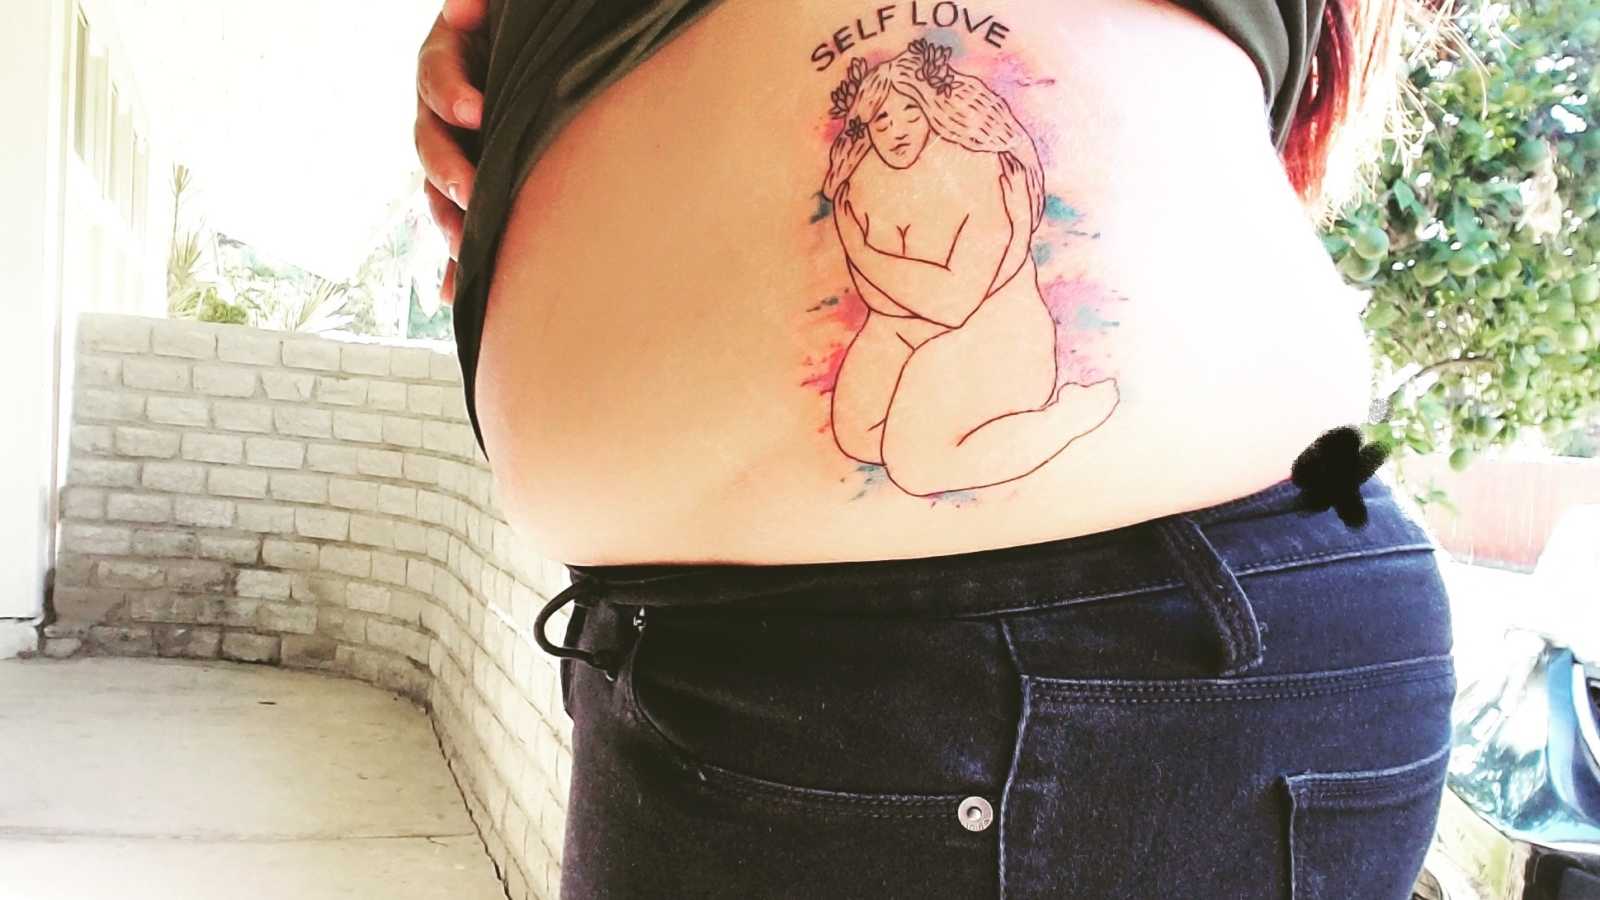 People are getting skincoloured tattoos to cover up their stretch marks